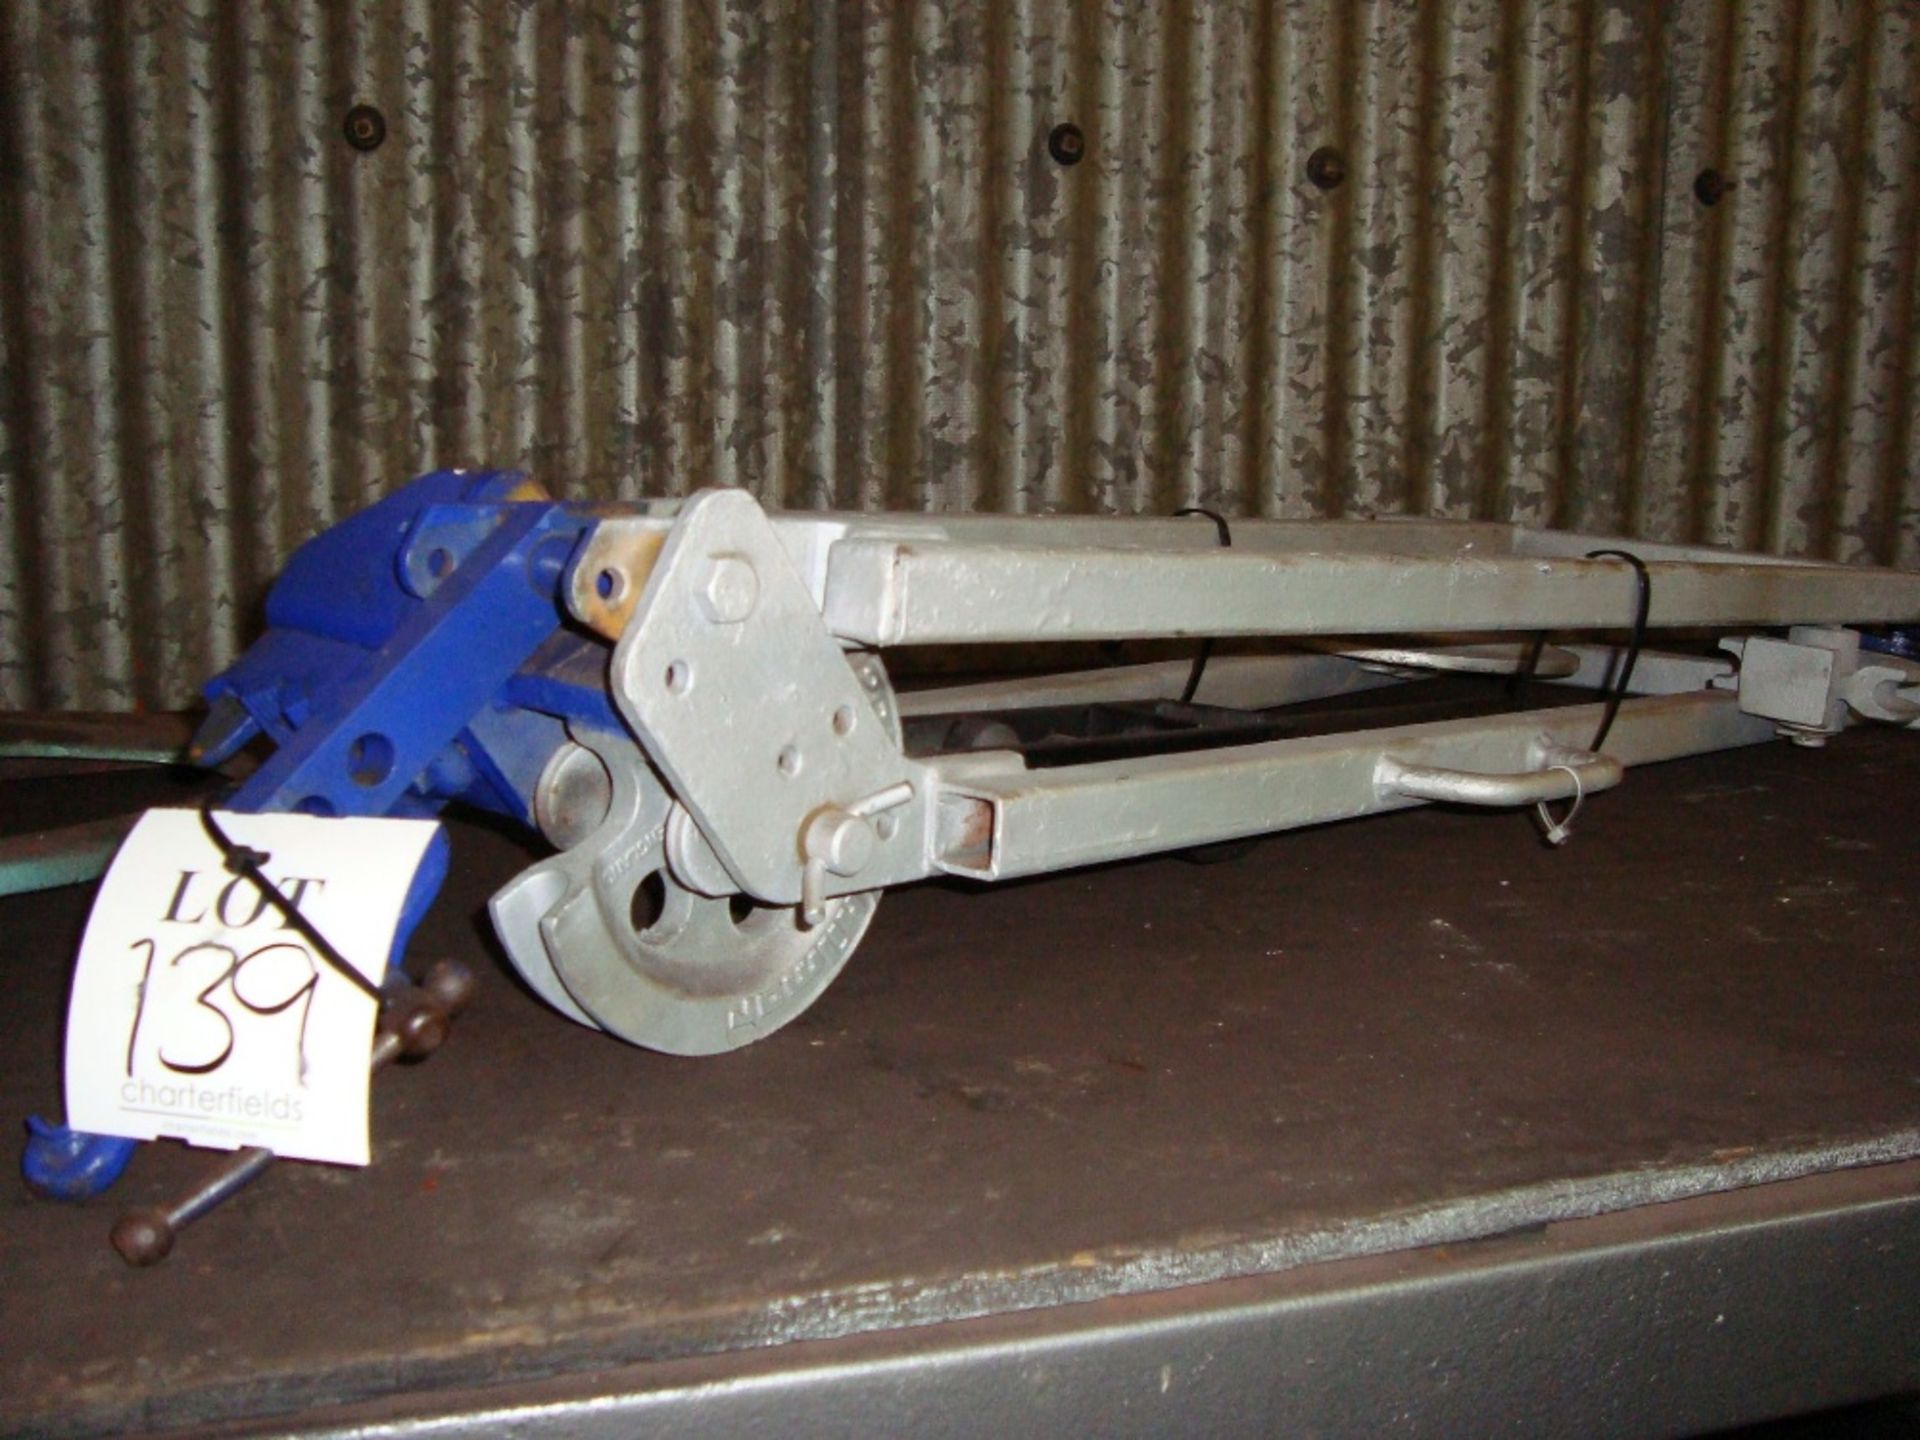 A Hilmor pipe bender with three forms, 16, 20 and 25mm